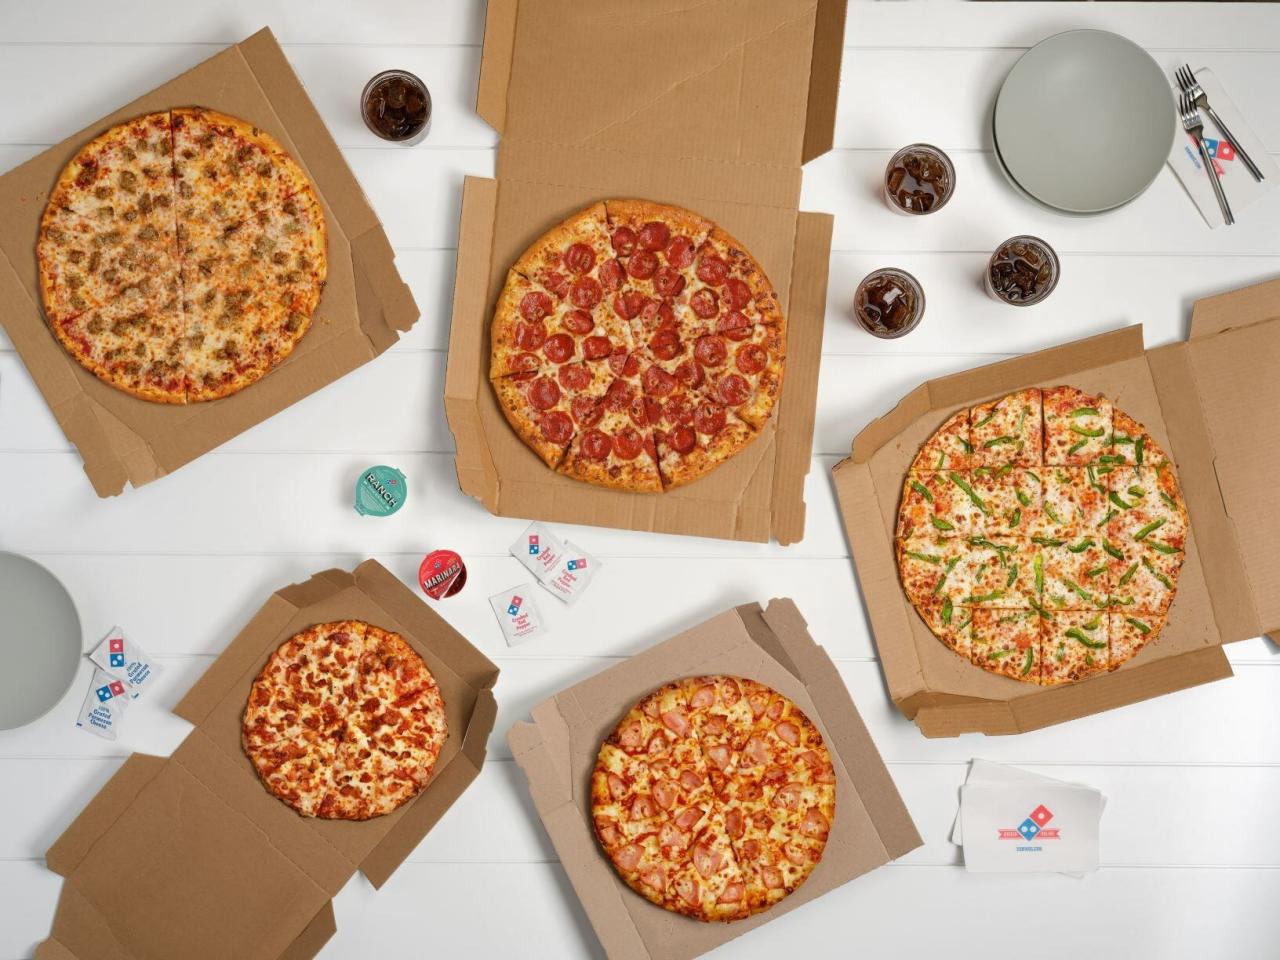 Domino’s Pizzas Are Half-Off This Week | FN Dish - Behind-the-Scenes ...